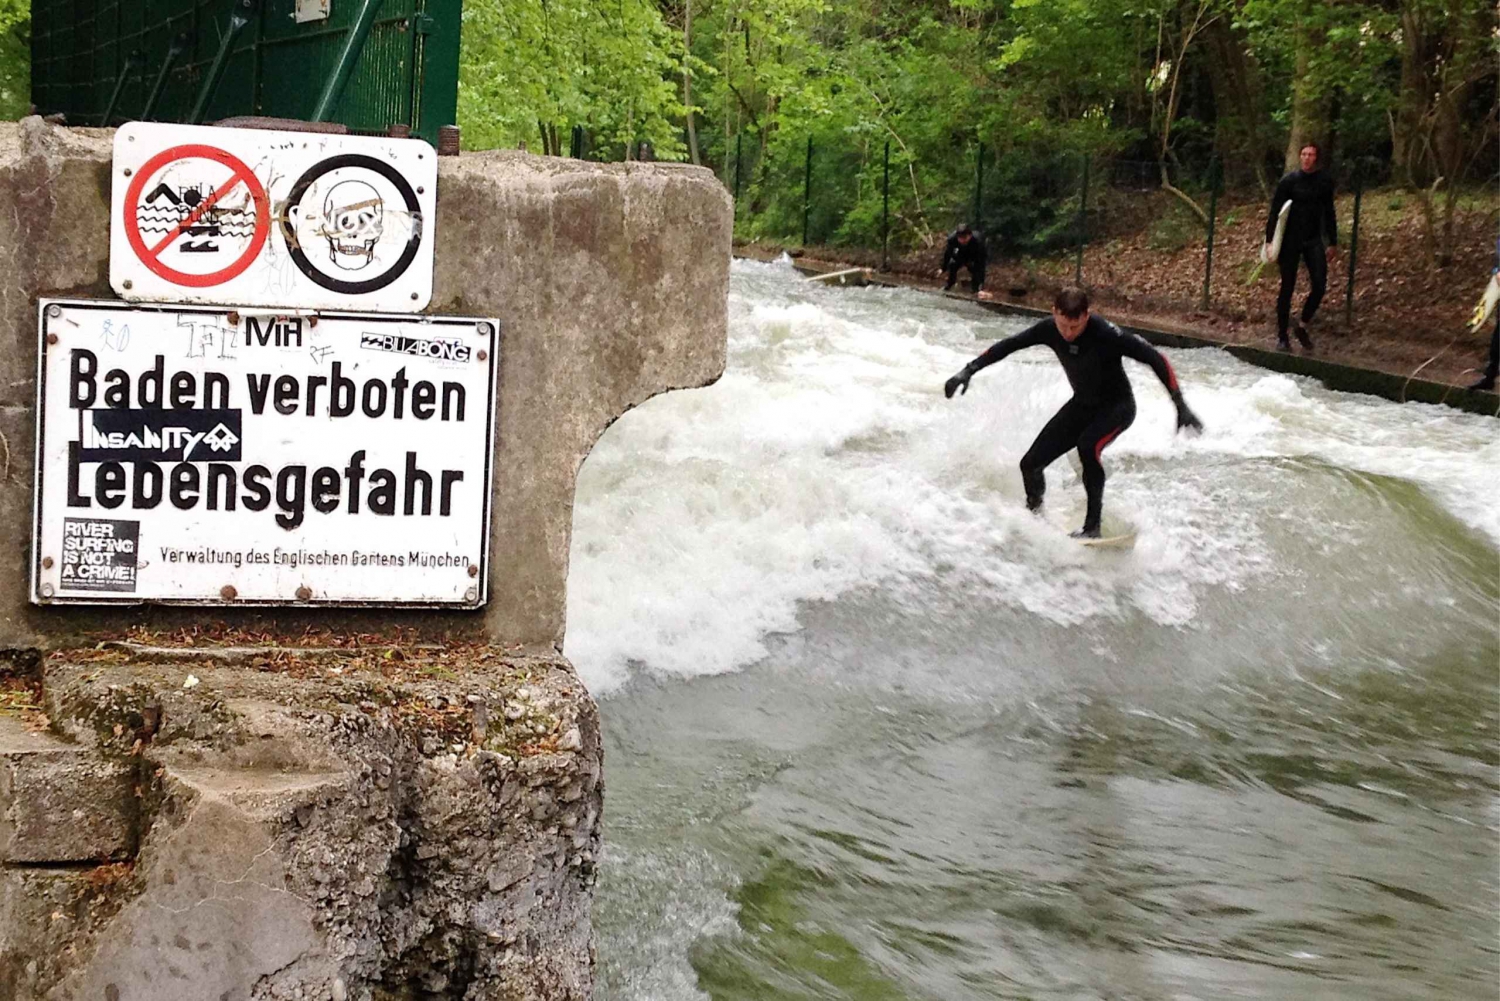 Munich: The Ultimate Bachelor Party - Surf Experience Munich